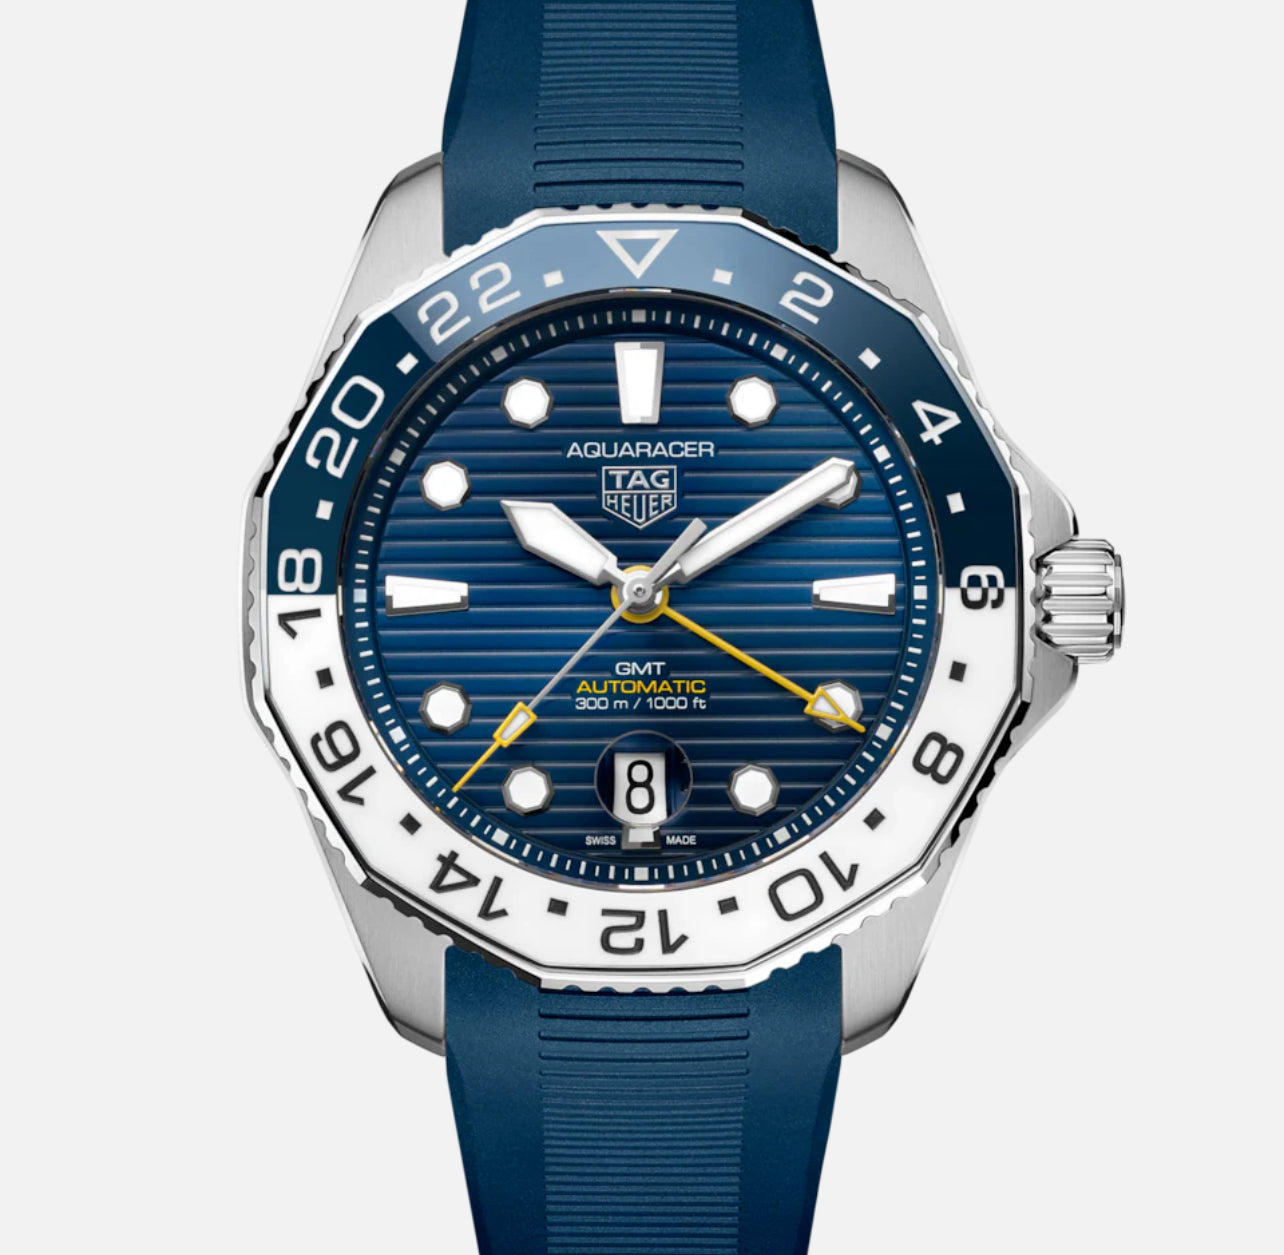 TAG HEUER-AQUARACER PROFESSIONAL 300 GMT Automatic Watch - Diameter 43 mm WBP2010.FT6198